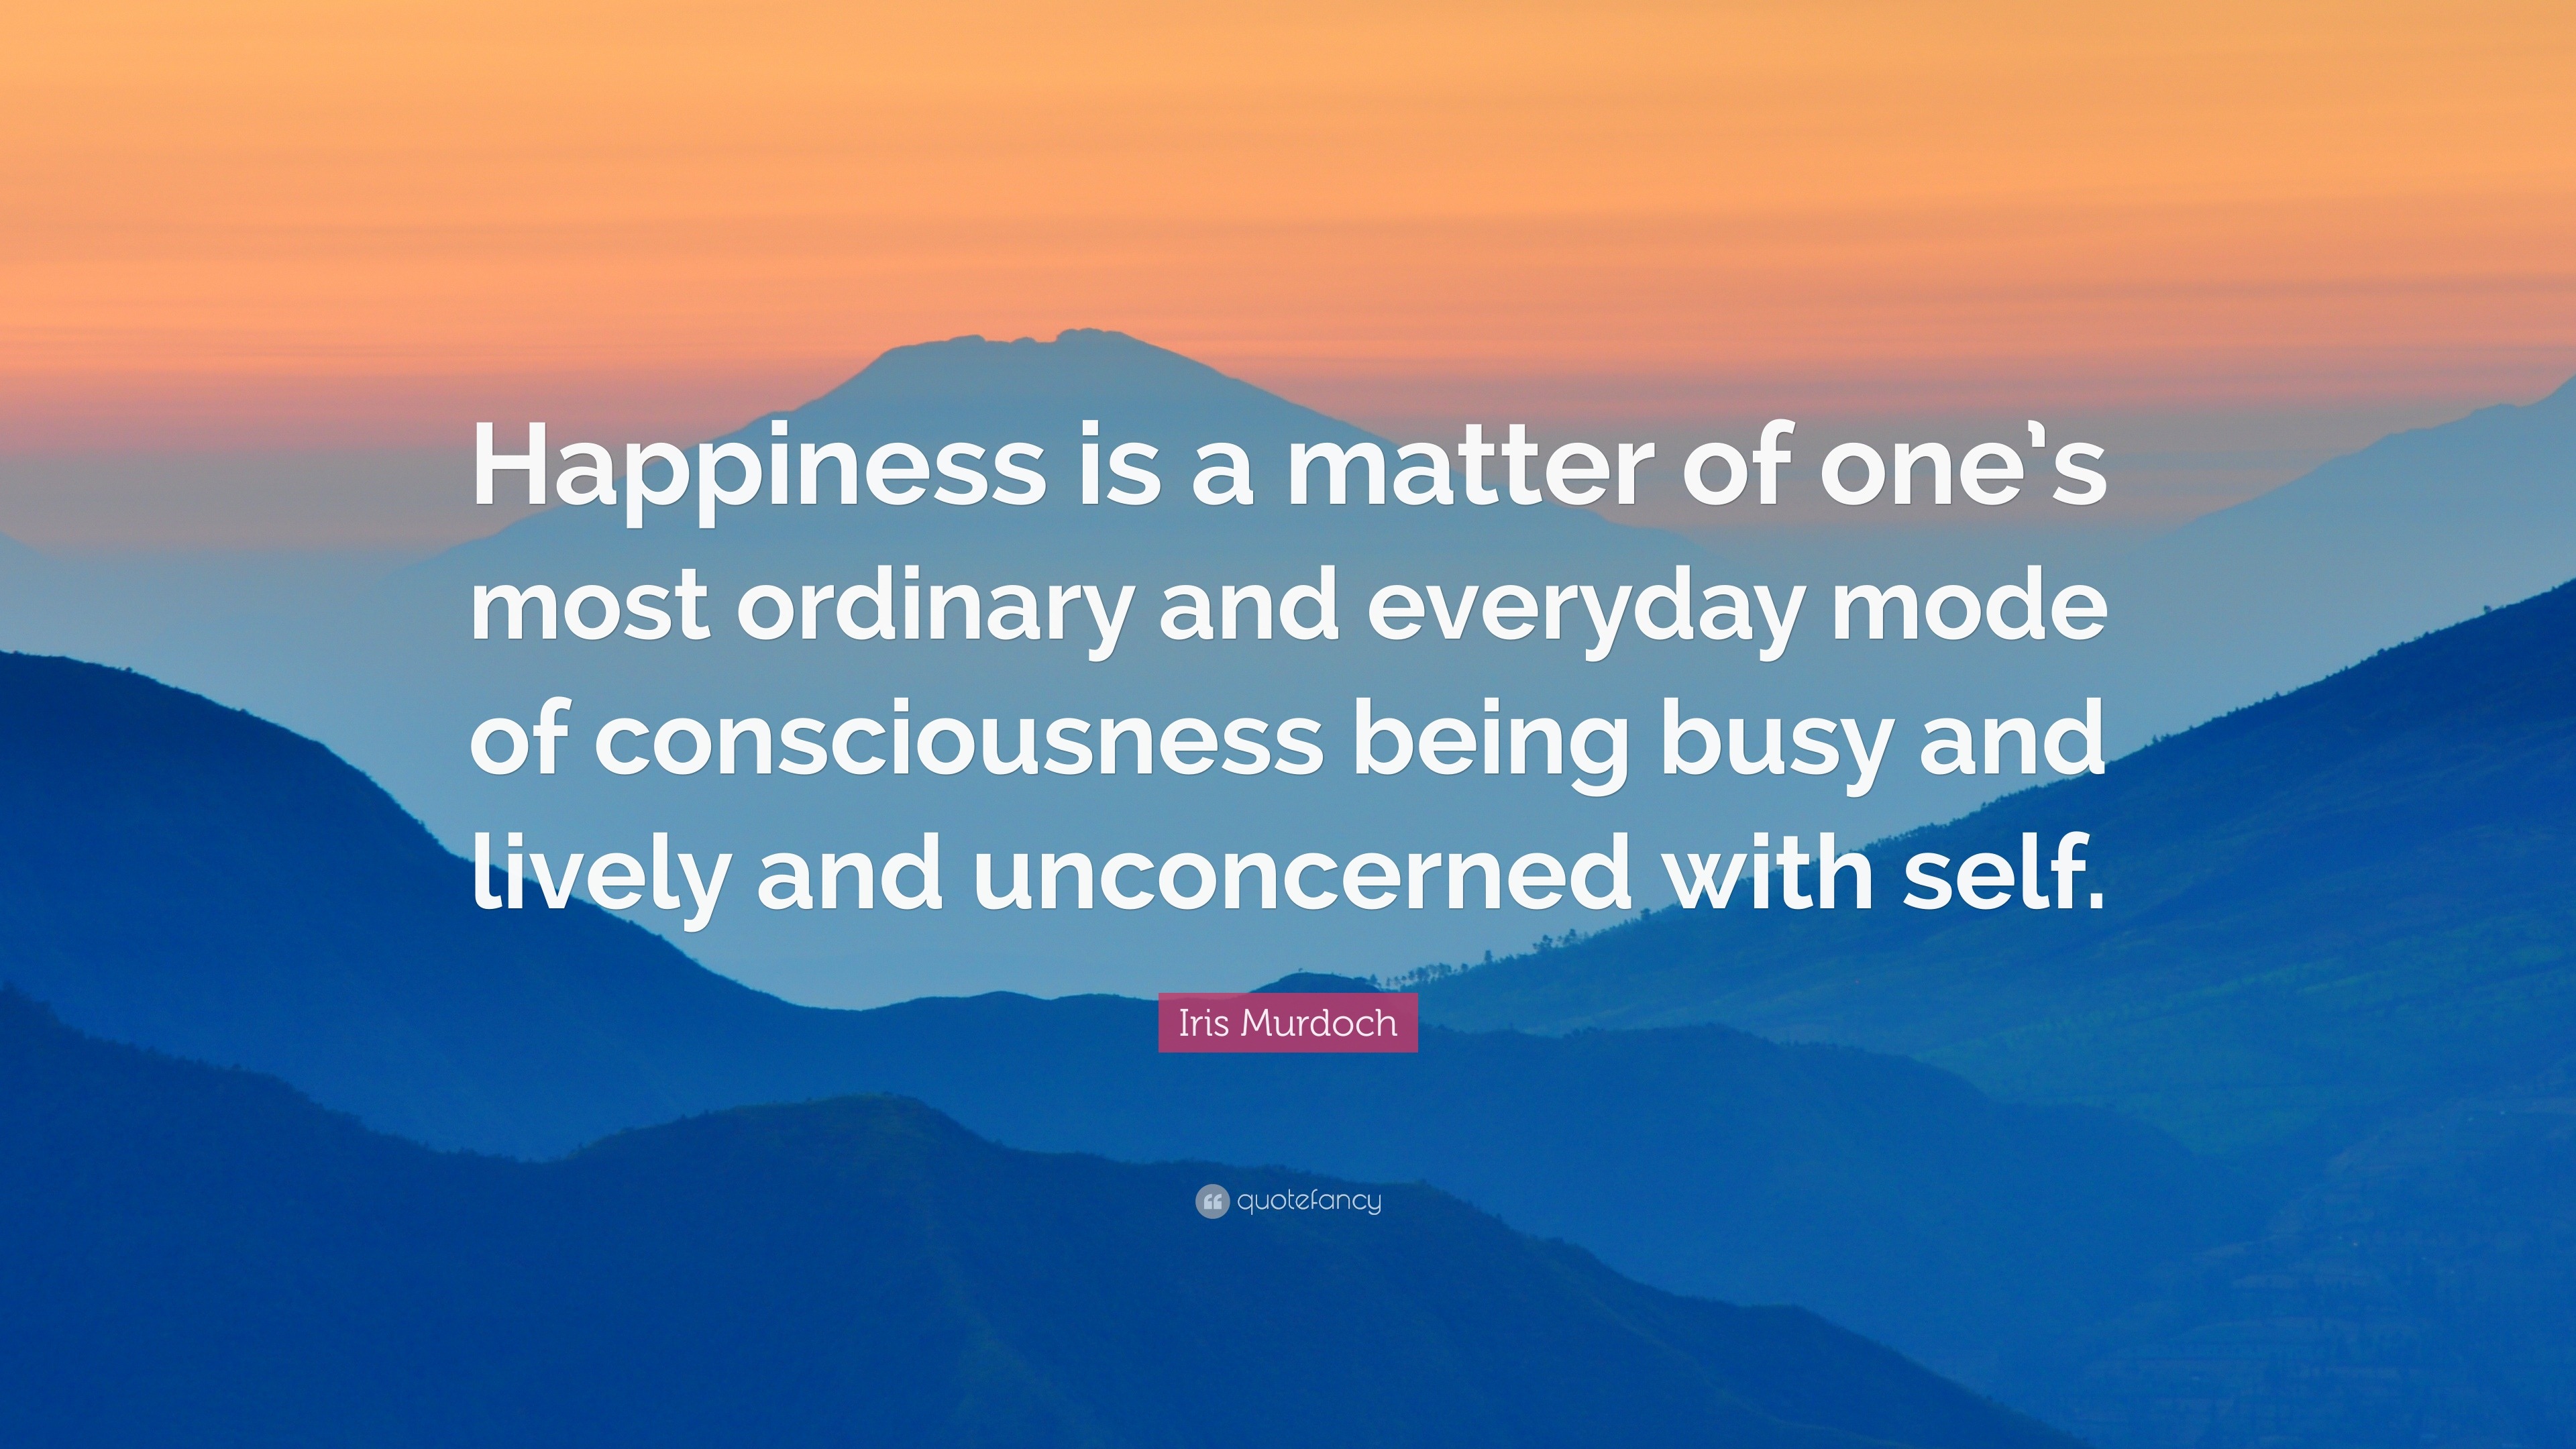 Iris Murdoch Quote: “Happiness is a matter of one’s most ordinary and ...